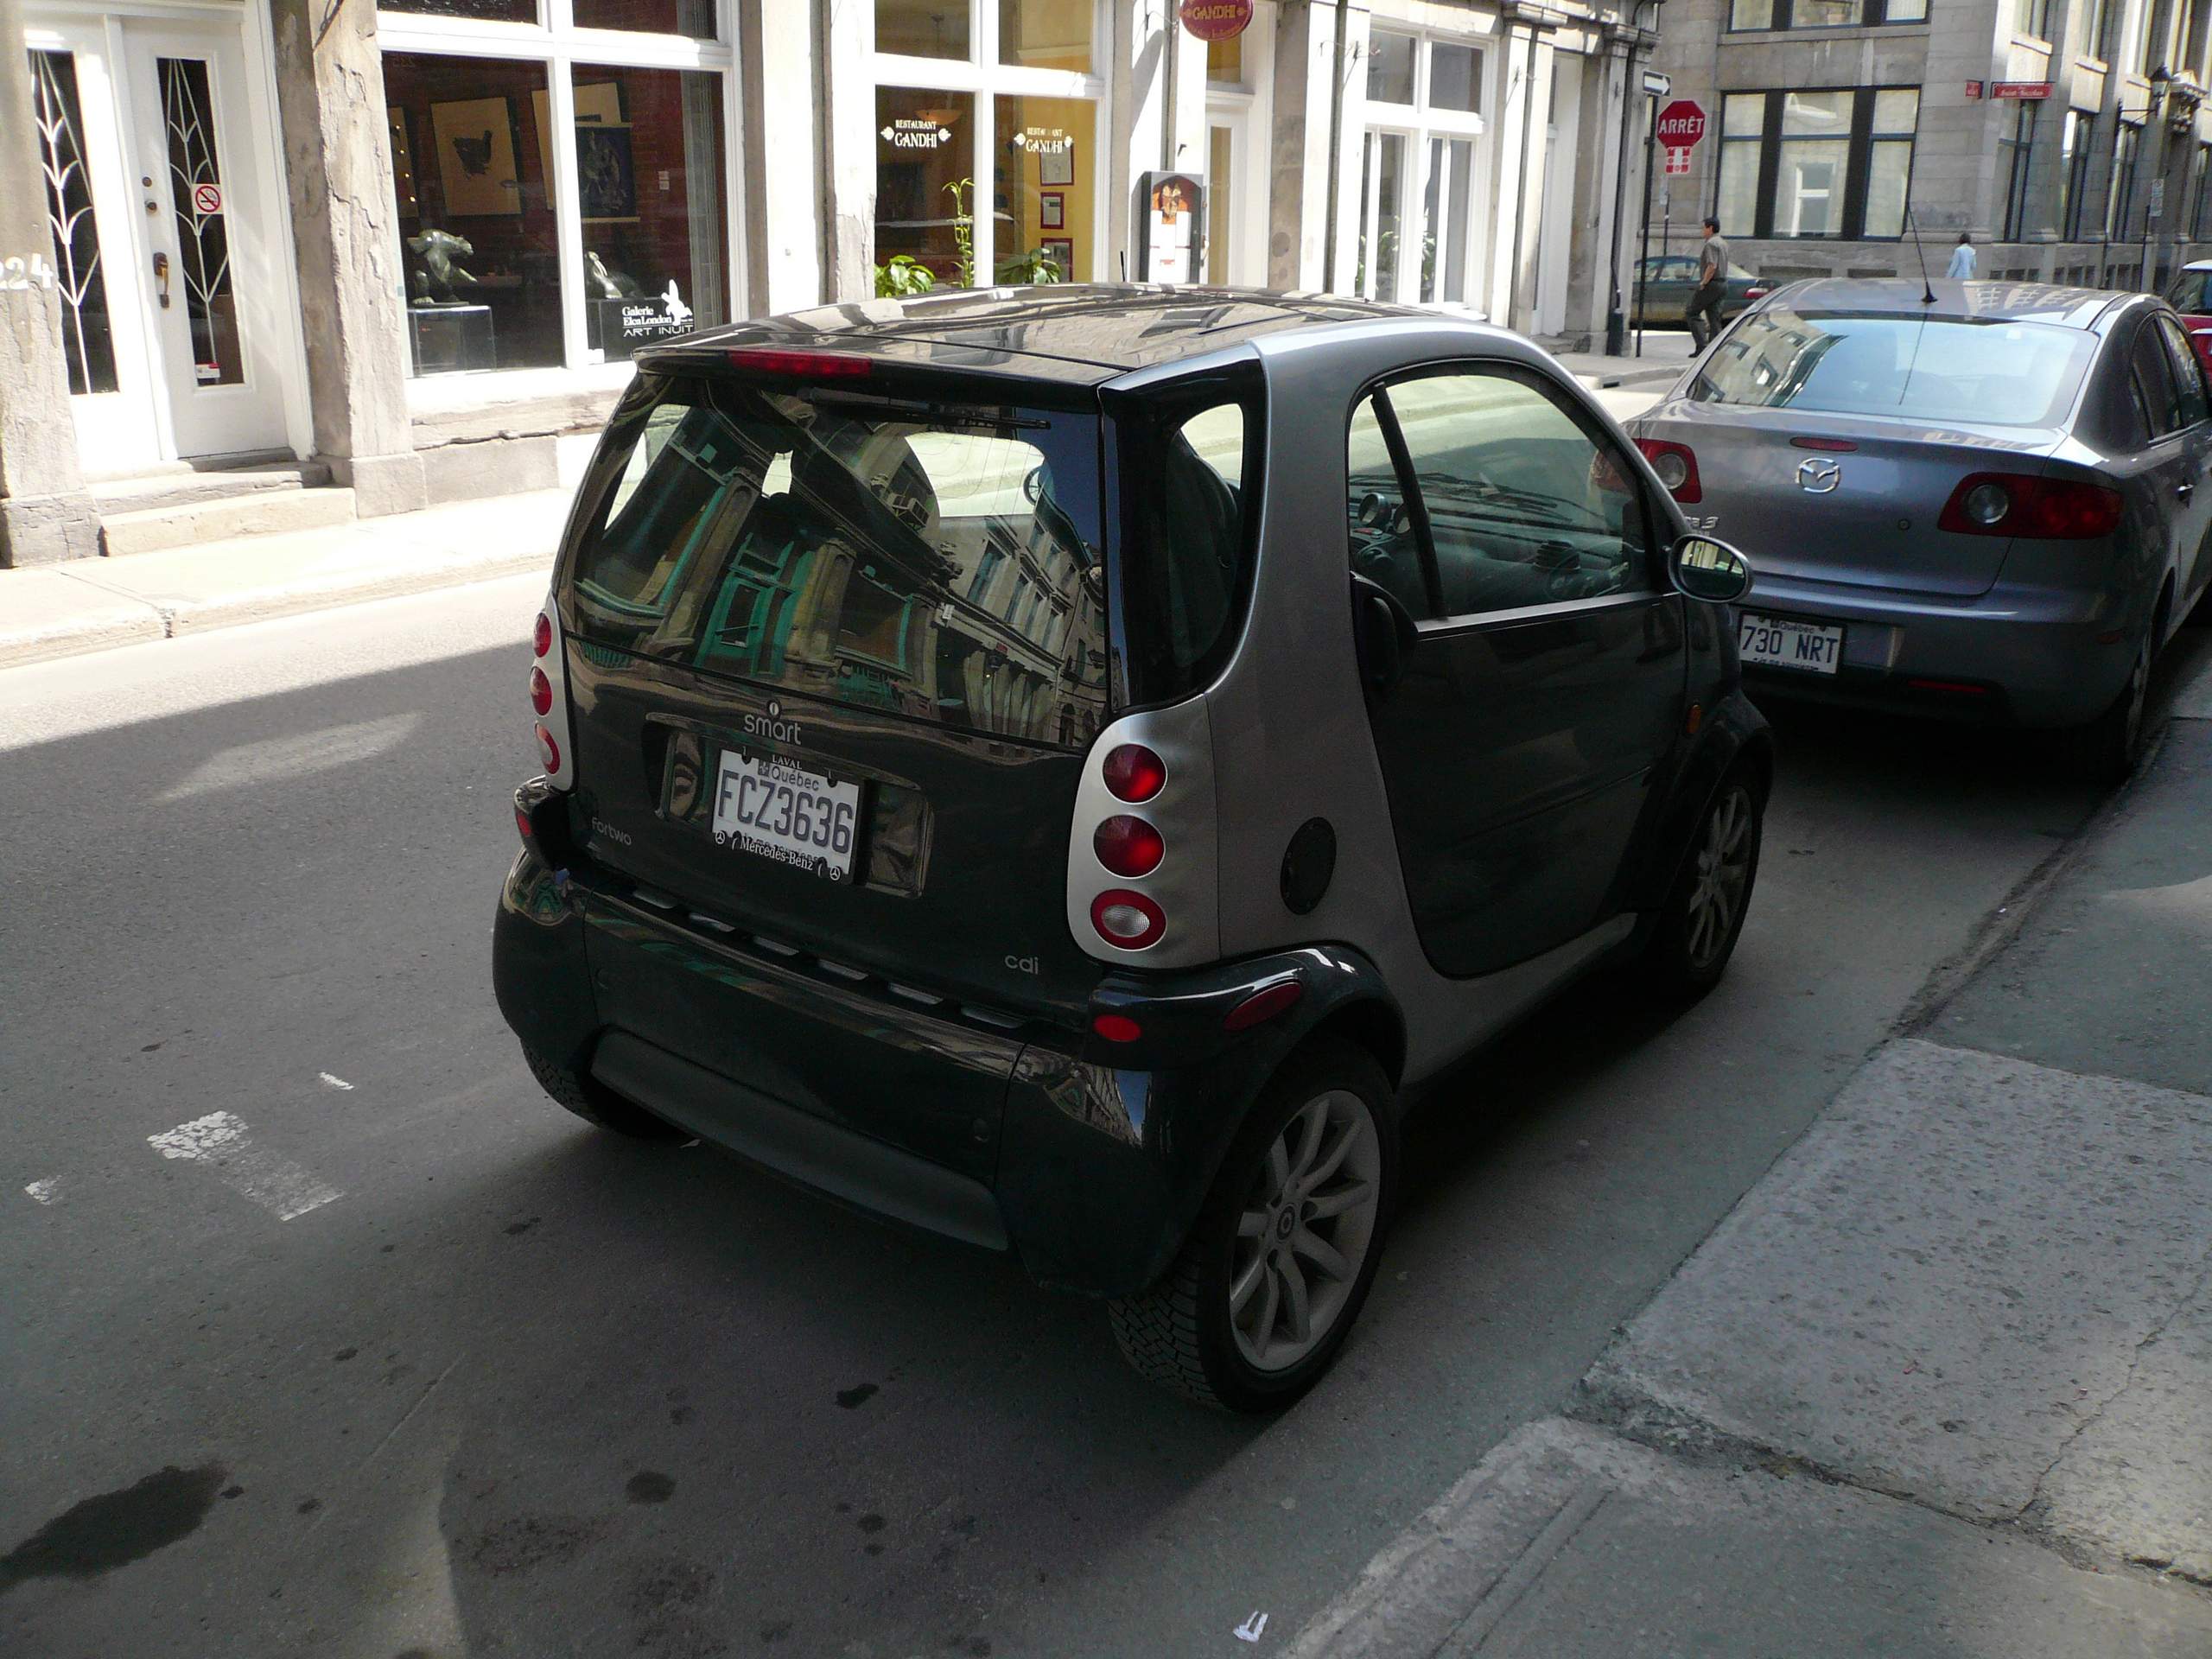 In Montreal, there are a lot of Smart cars  which indeed are a "smart" choice for cities with limited parking.